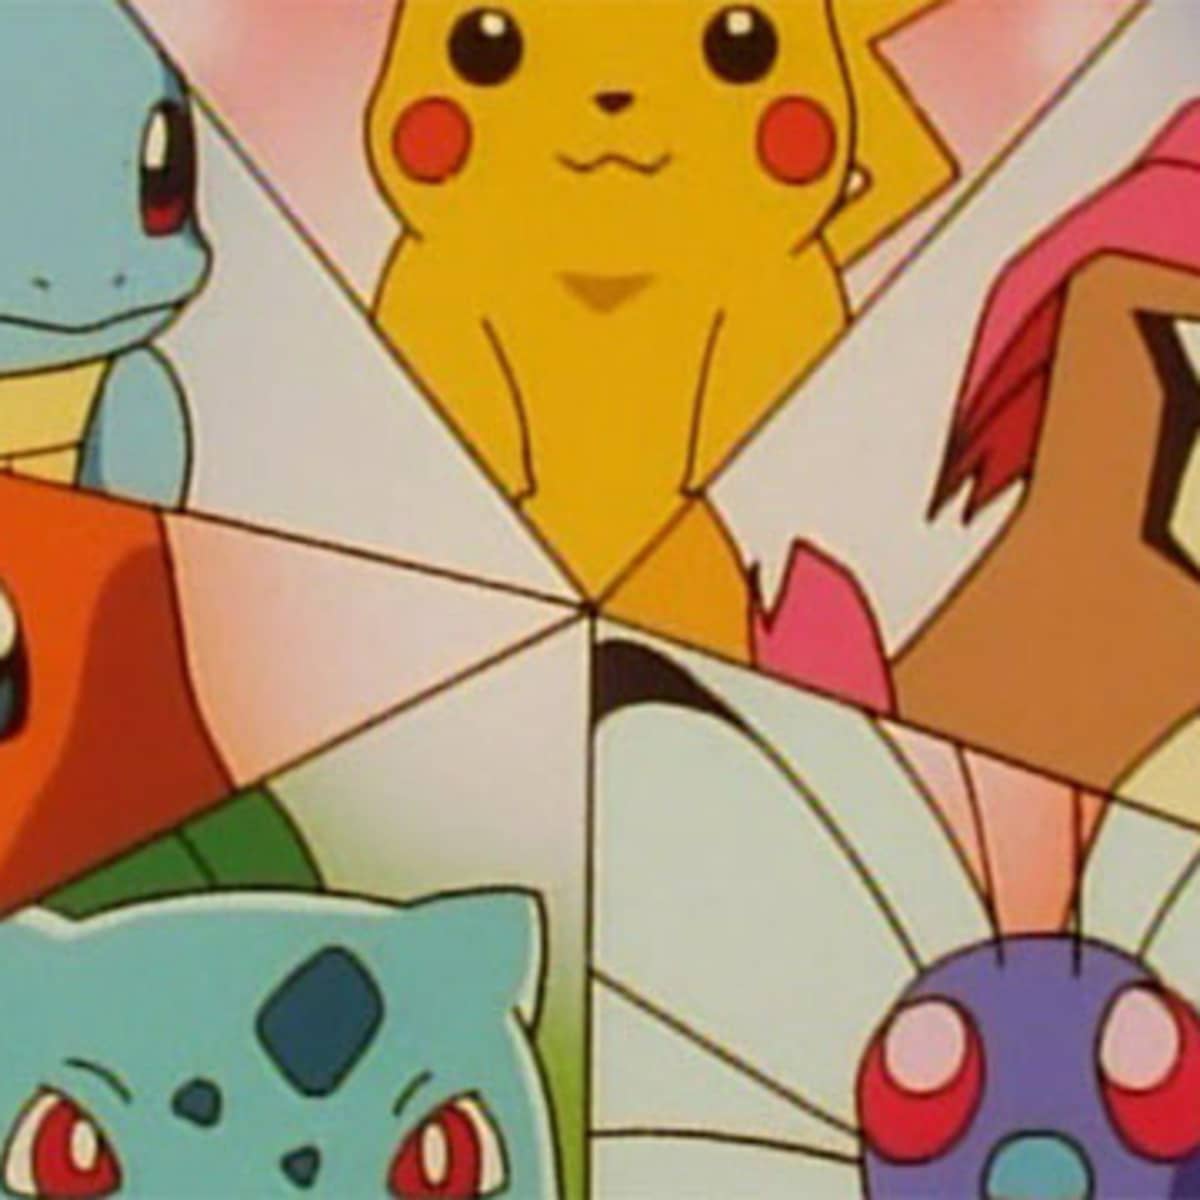 Every Pokemon Anime Series Ranked From Worst to Best - YouTube